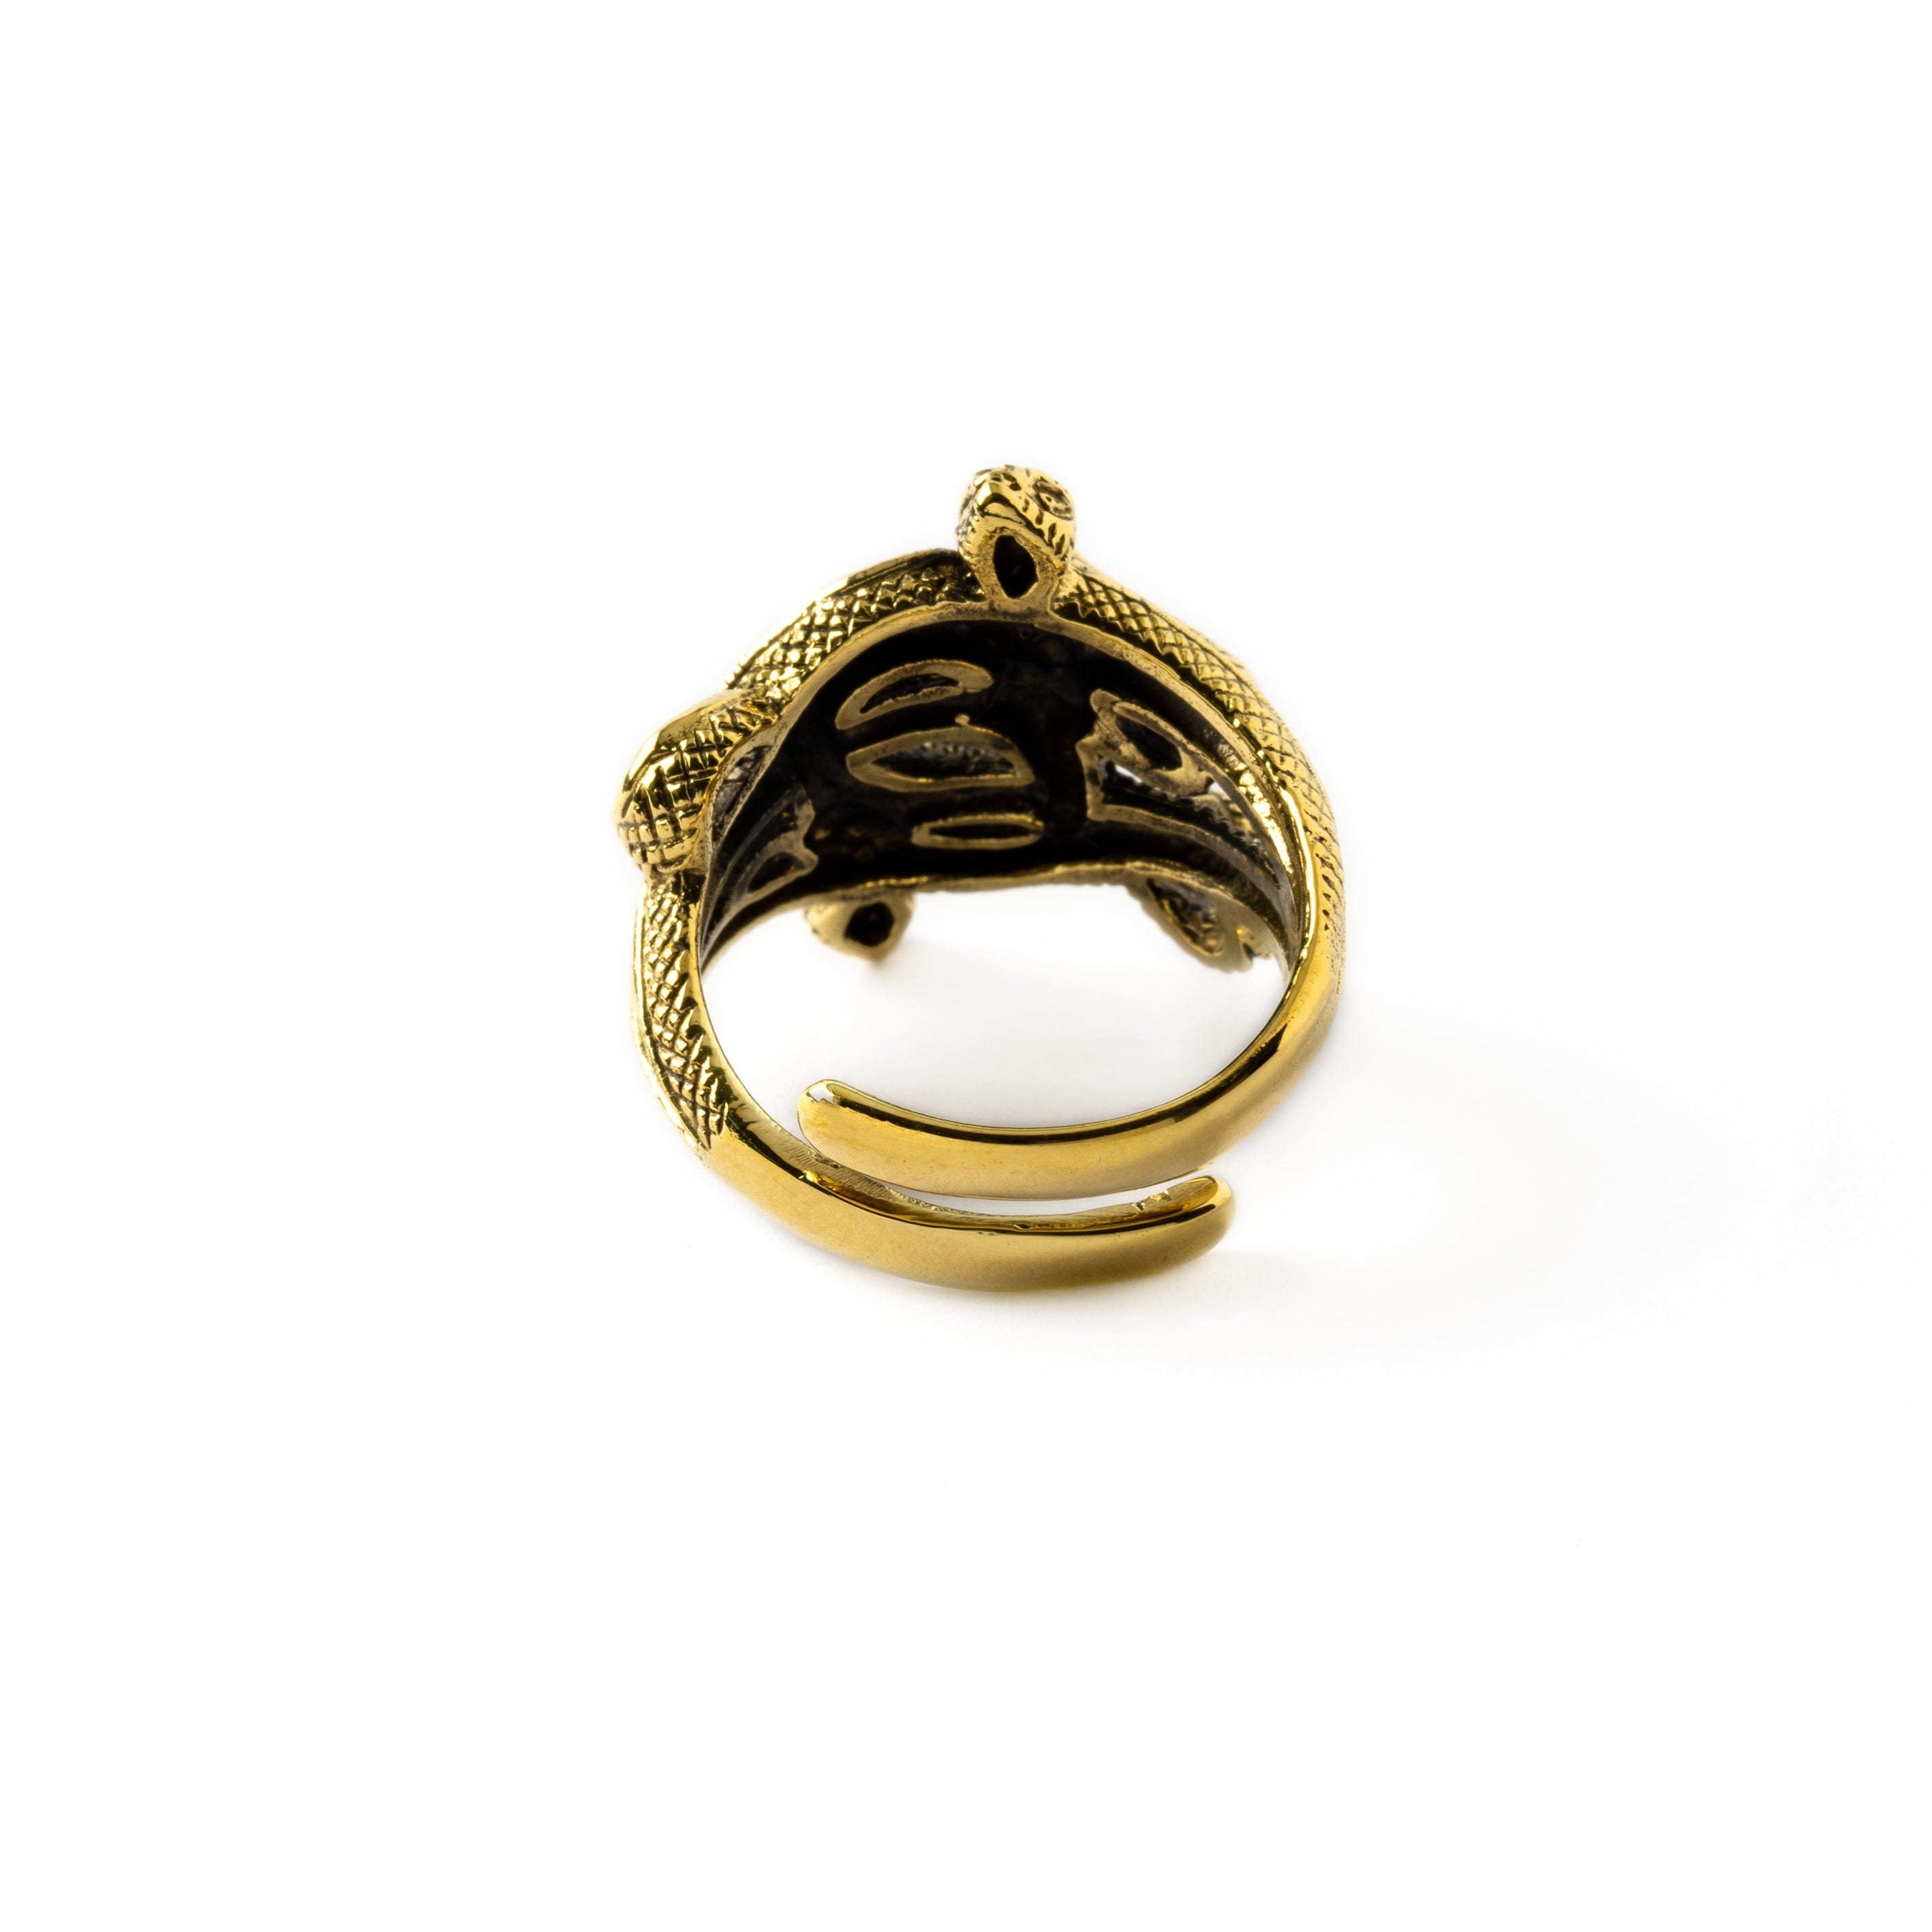 Golden brass Entwined Serpents adjustable ring back side view